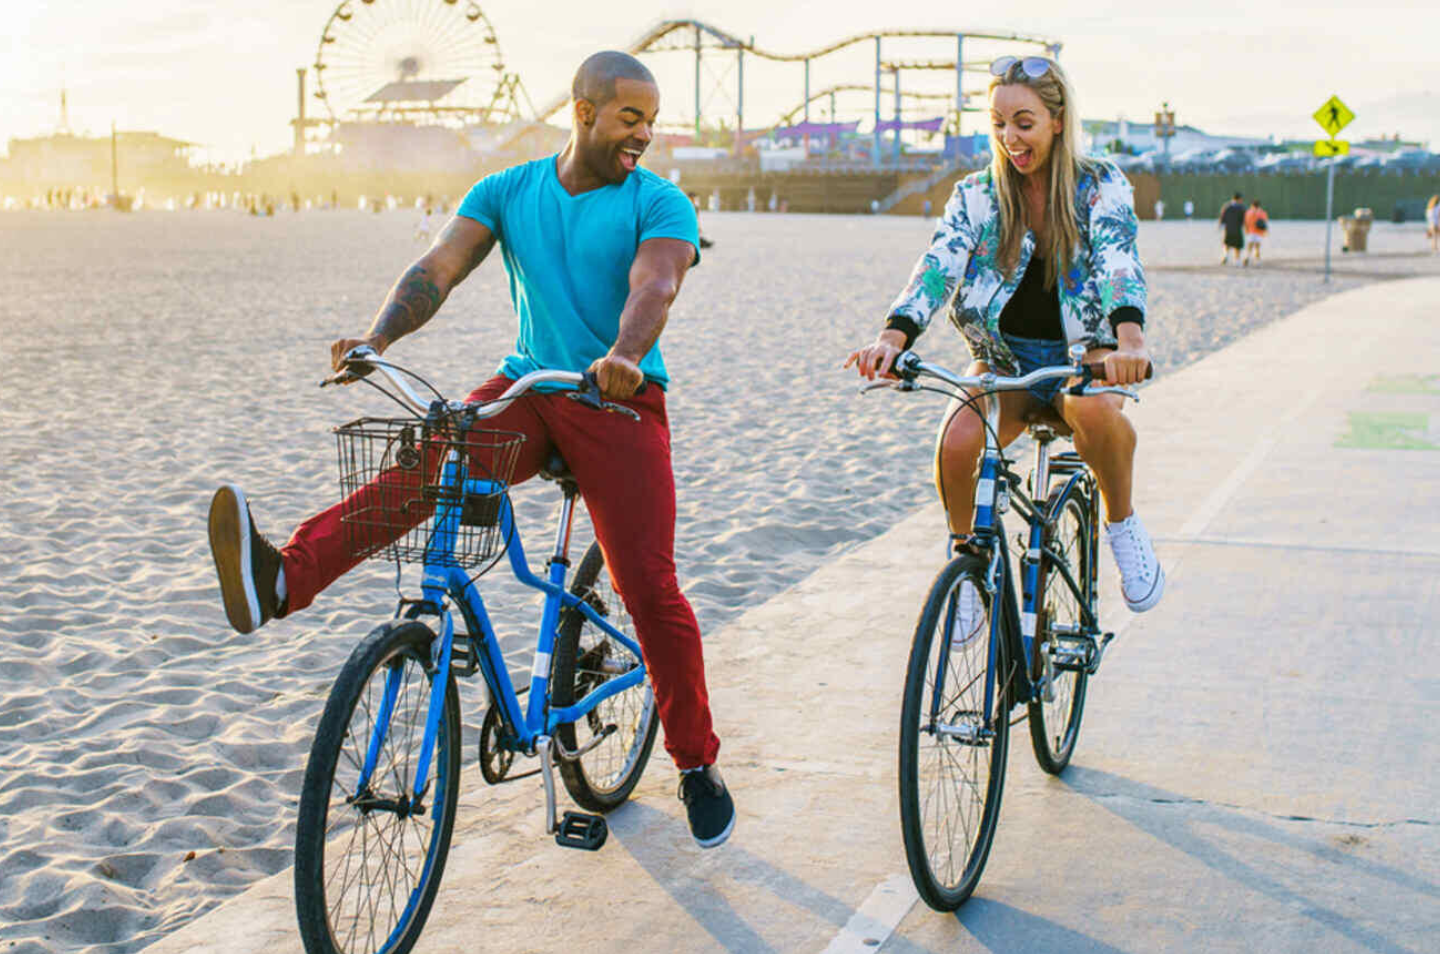 15 Fun Things to Do in California for Couples: Every Budget!